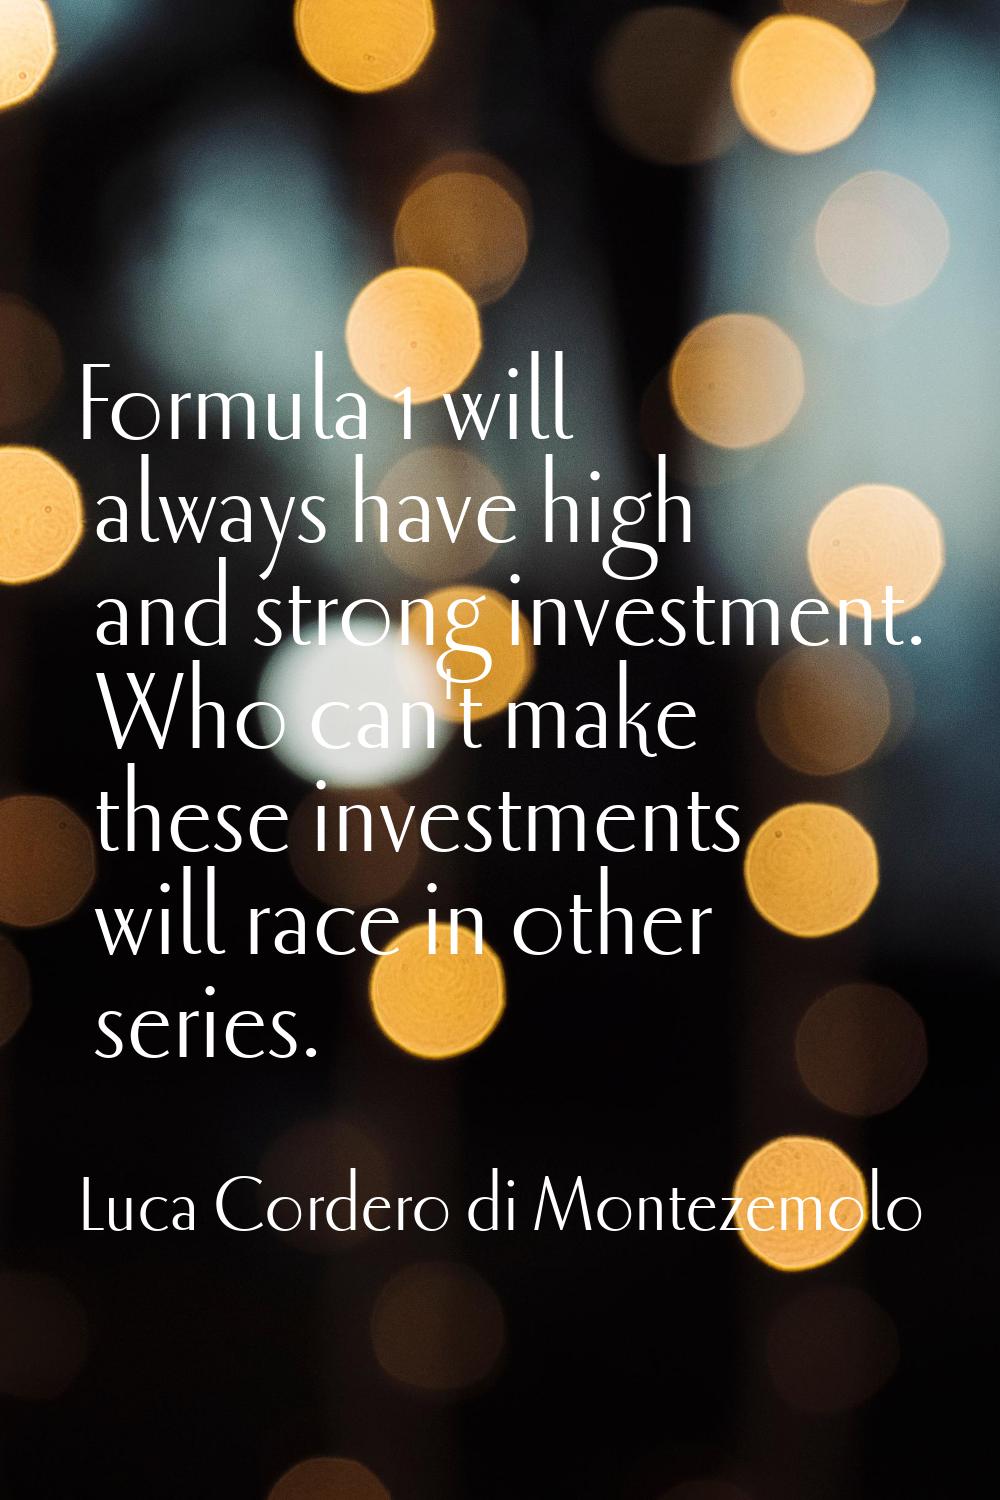 Formula 1 will always have high and strong investment. Who can't make these investments will race i